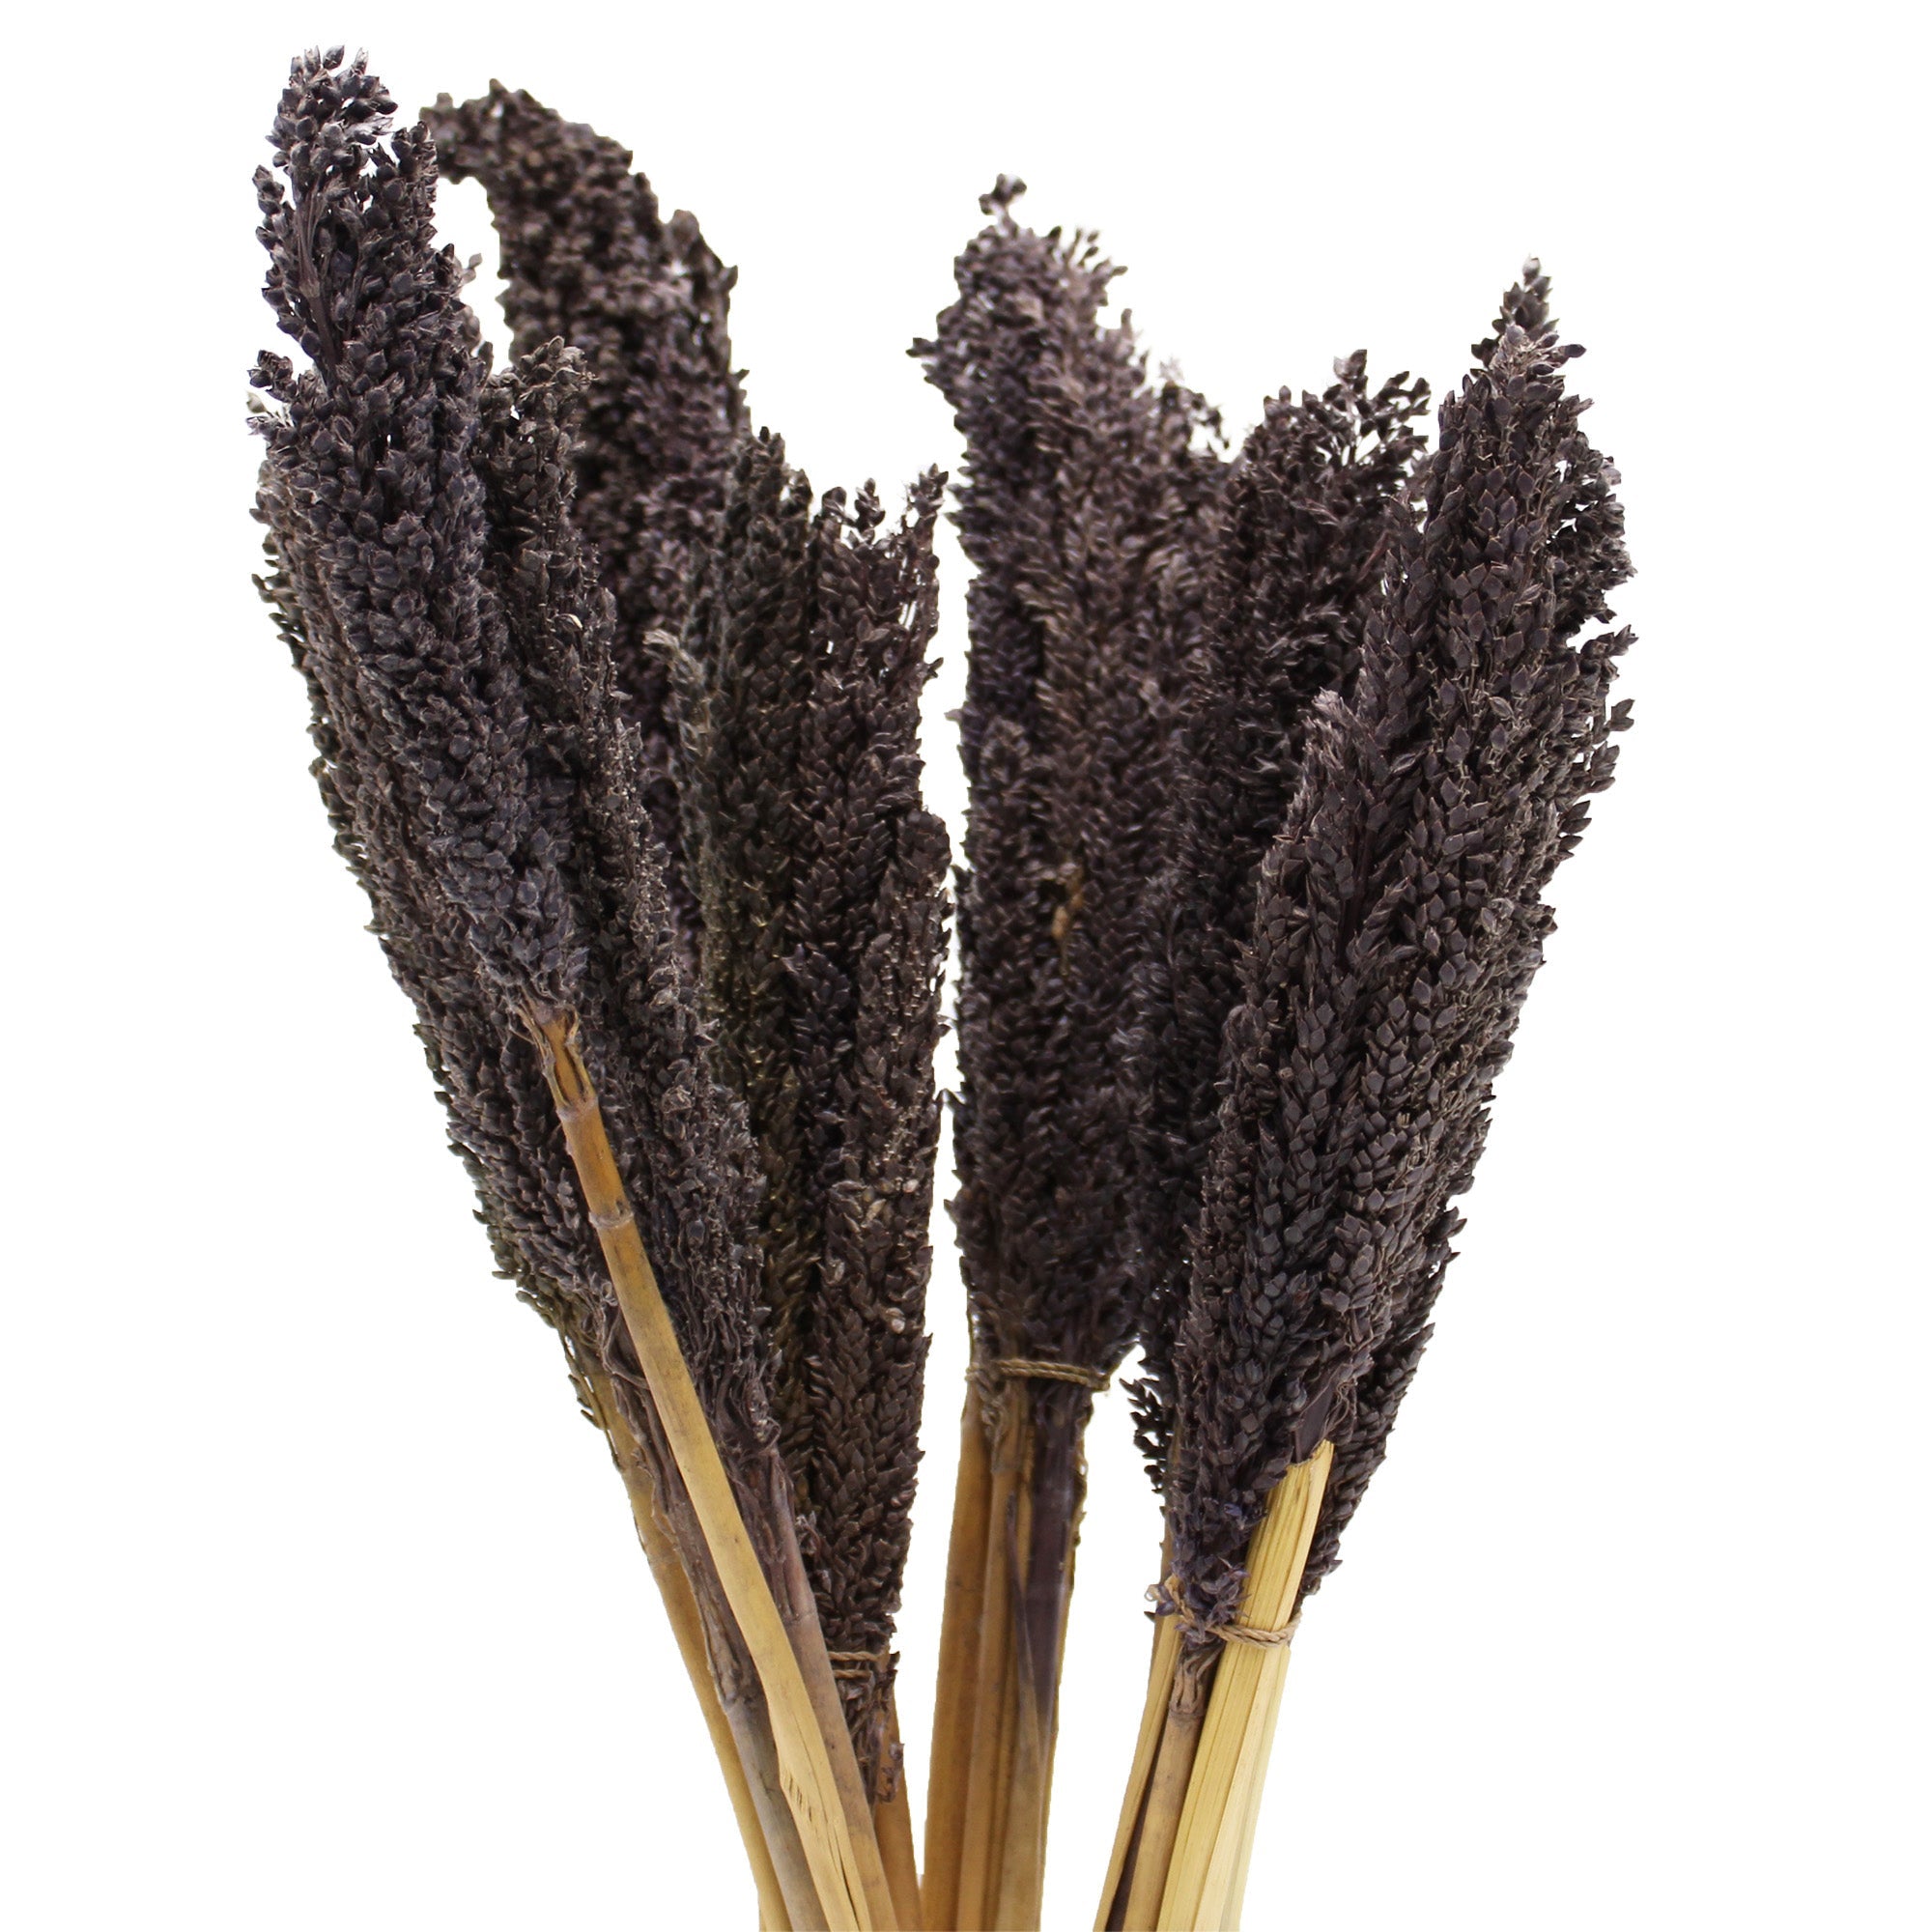 View Cantal Grass Bunch Black information